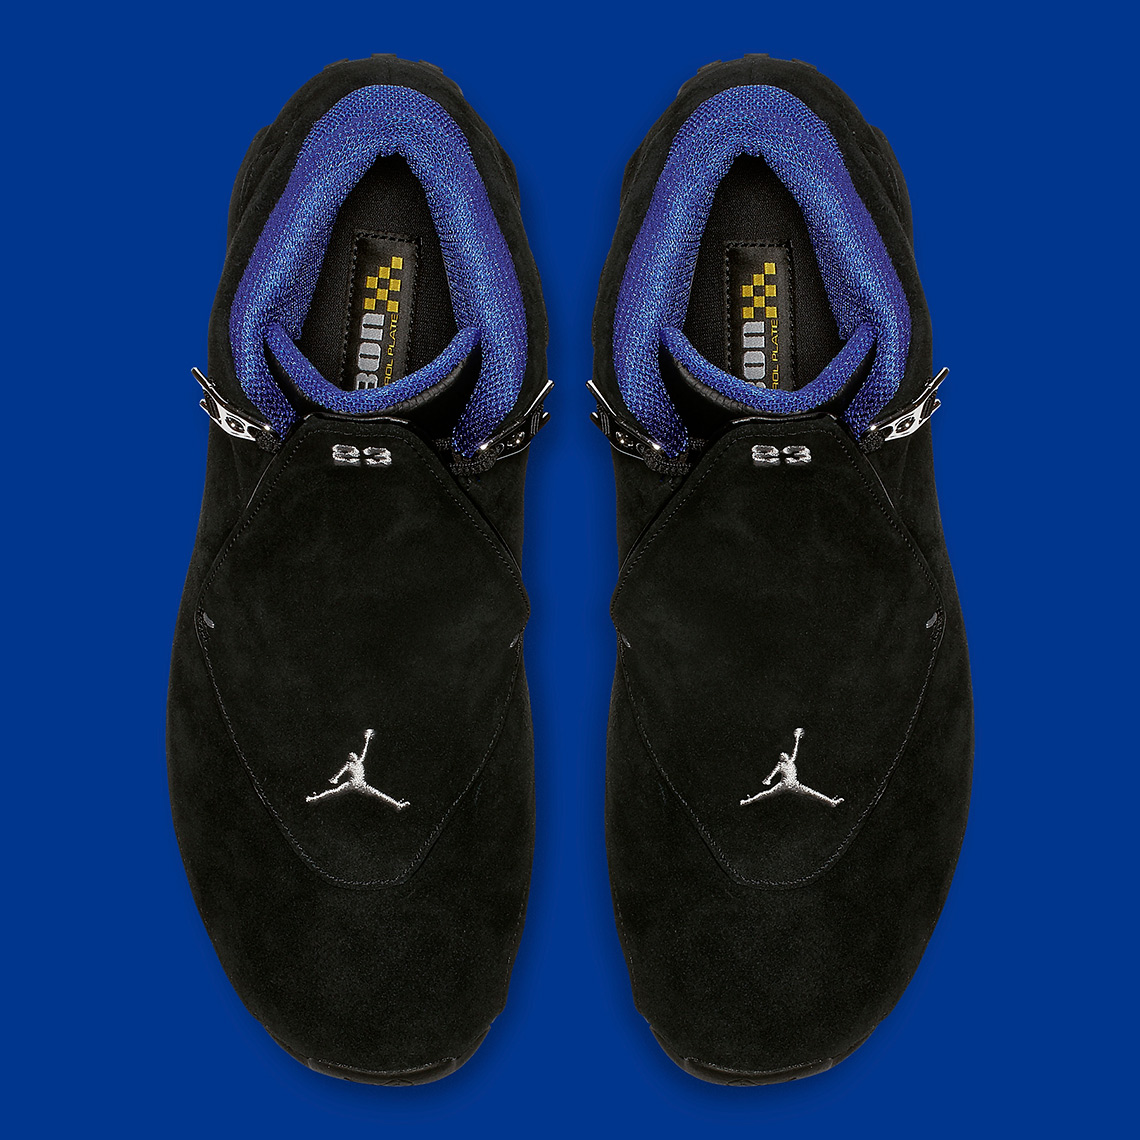 The Air Jordan 18 'Black Sport Royal' Release Date Has Been Moved Up -  WearTesters